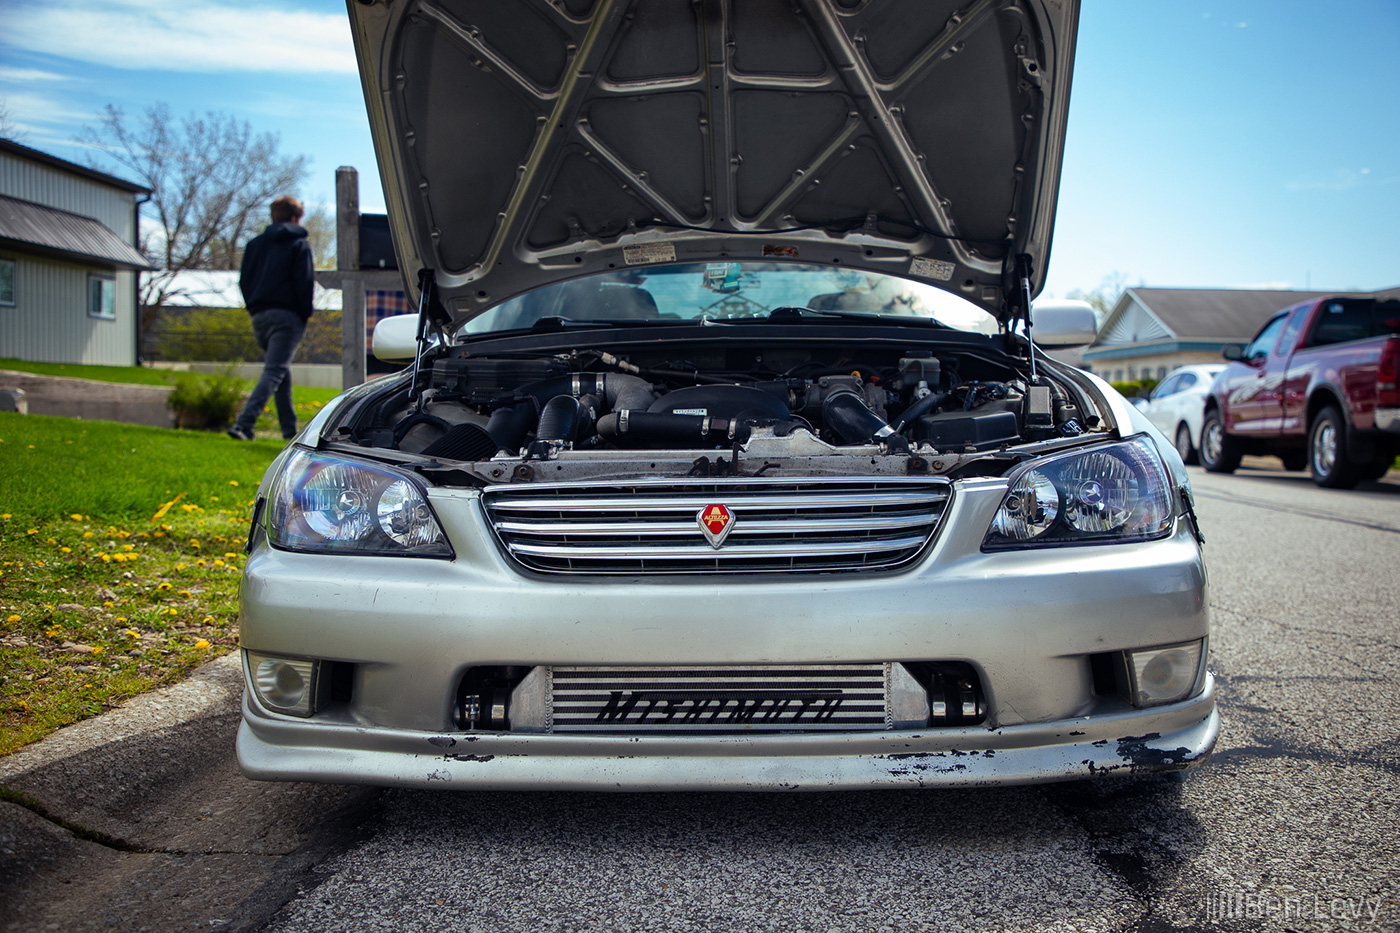 Silver Lexus IS300 with Altezza Grill